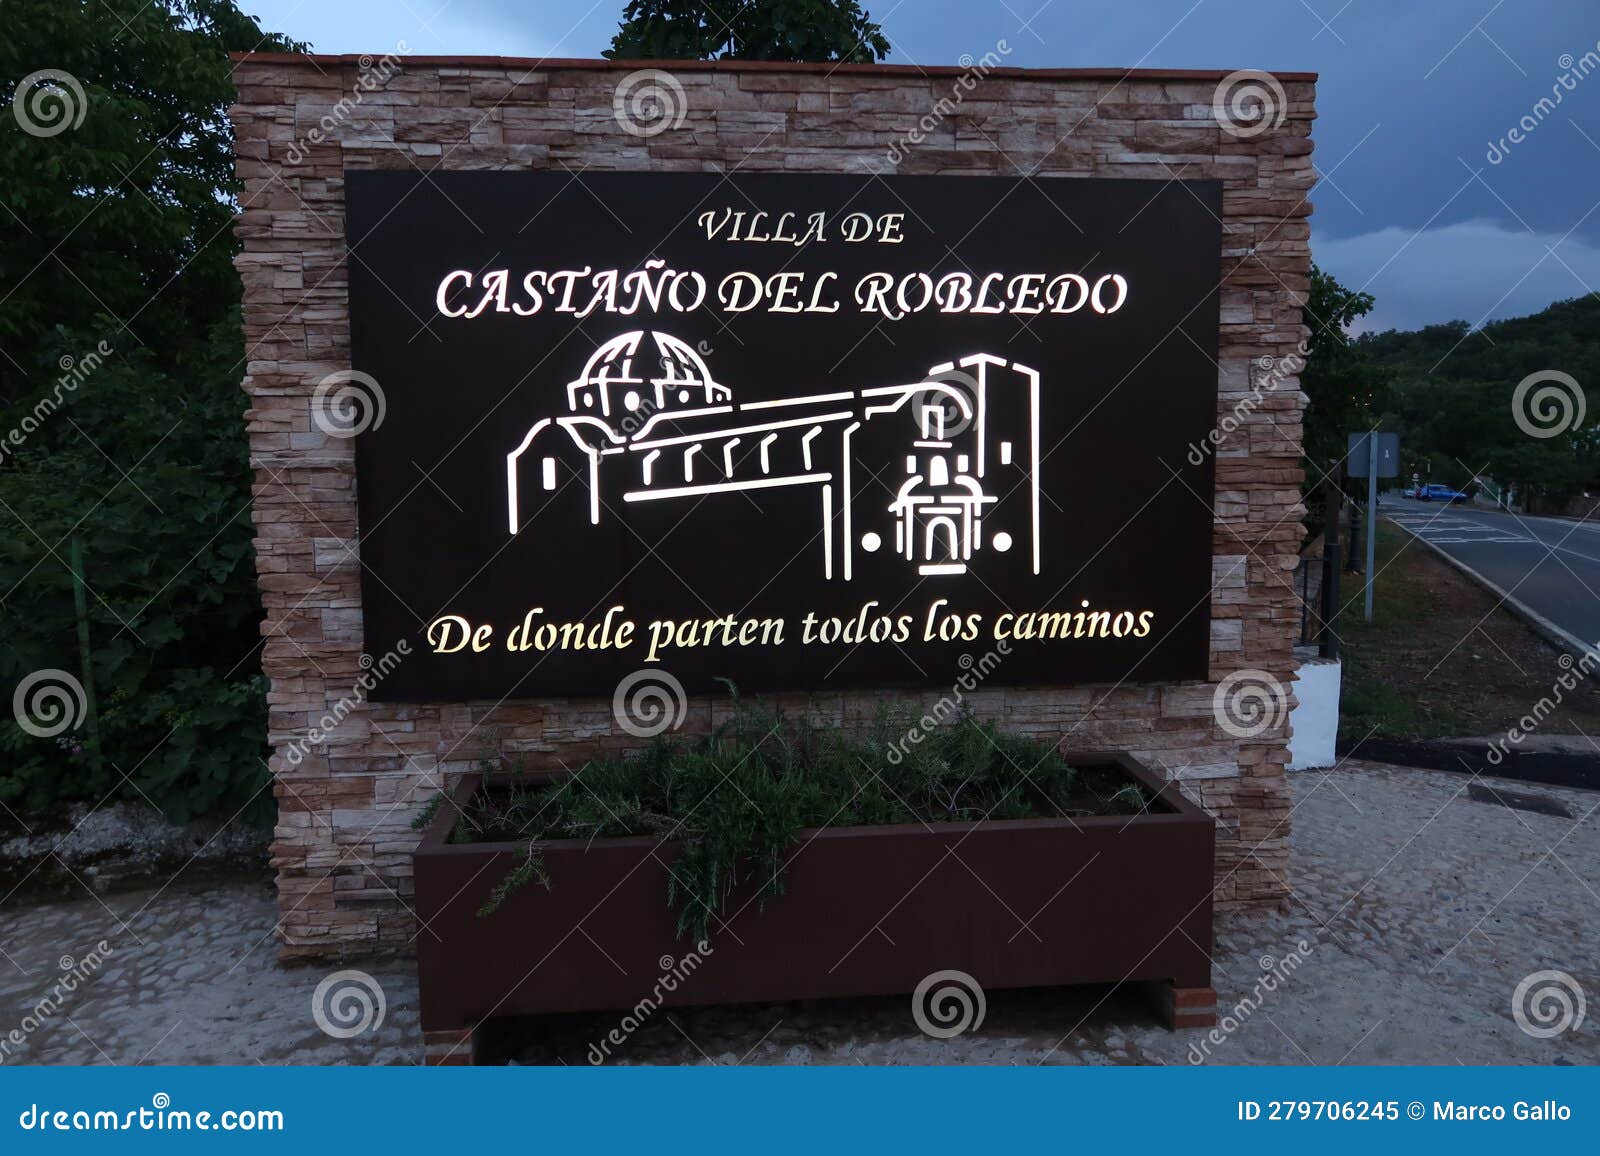 sign at the entrance of the town with the text castaÃÂ±o del robledo where all the roads start from